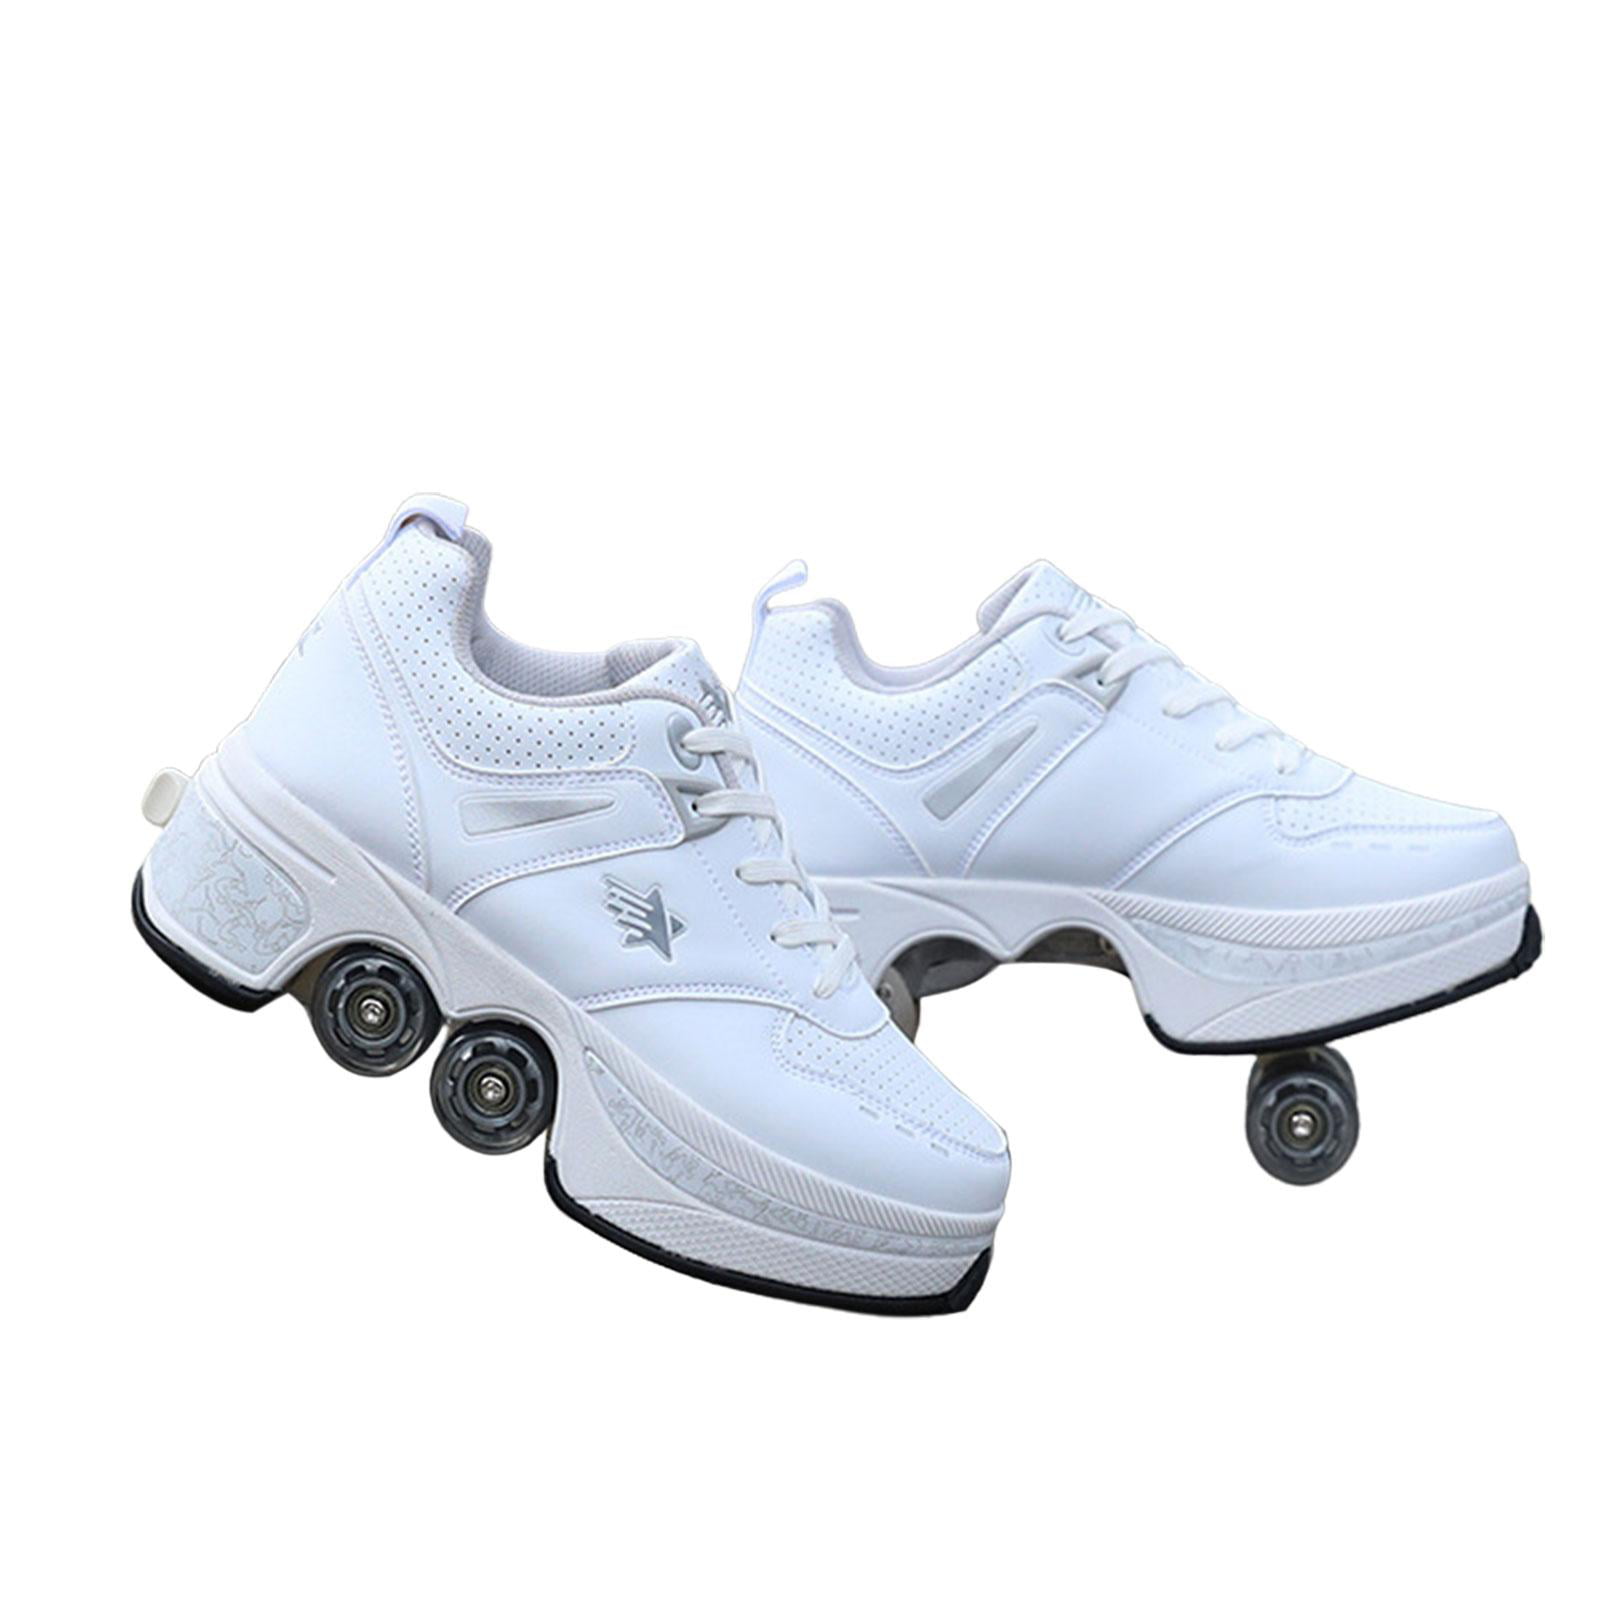 Roller Skates Deformation Parkour Shoes Automatic Walking Shoes 2 in 1 Double Line Skates/Kick Rollers Shoes for Adults Shoes with Wheels for Girls/Boys